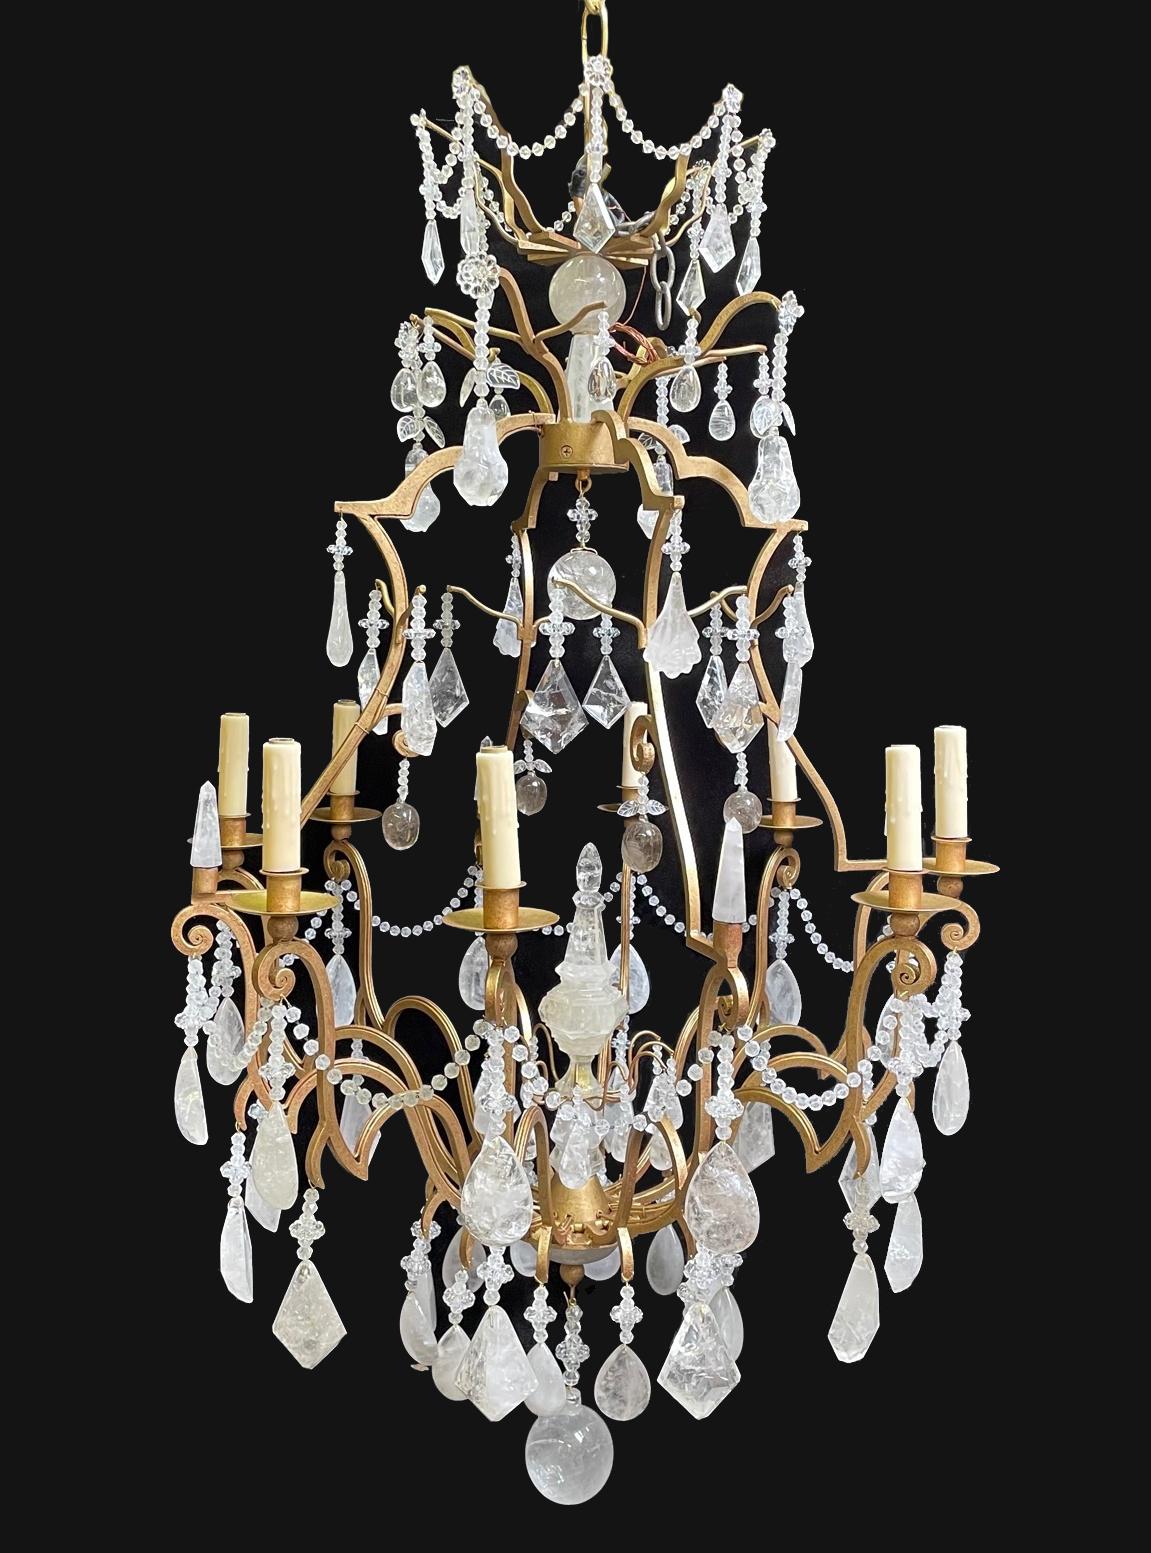 Hand-Crafted Rock Crystal 8 Light Gilt Chandelier, Louis XV Style For Sale